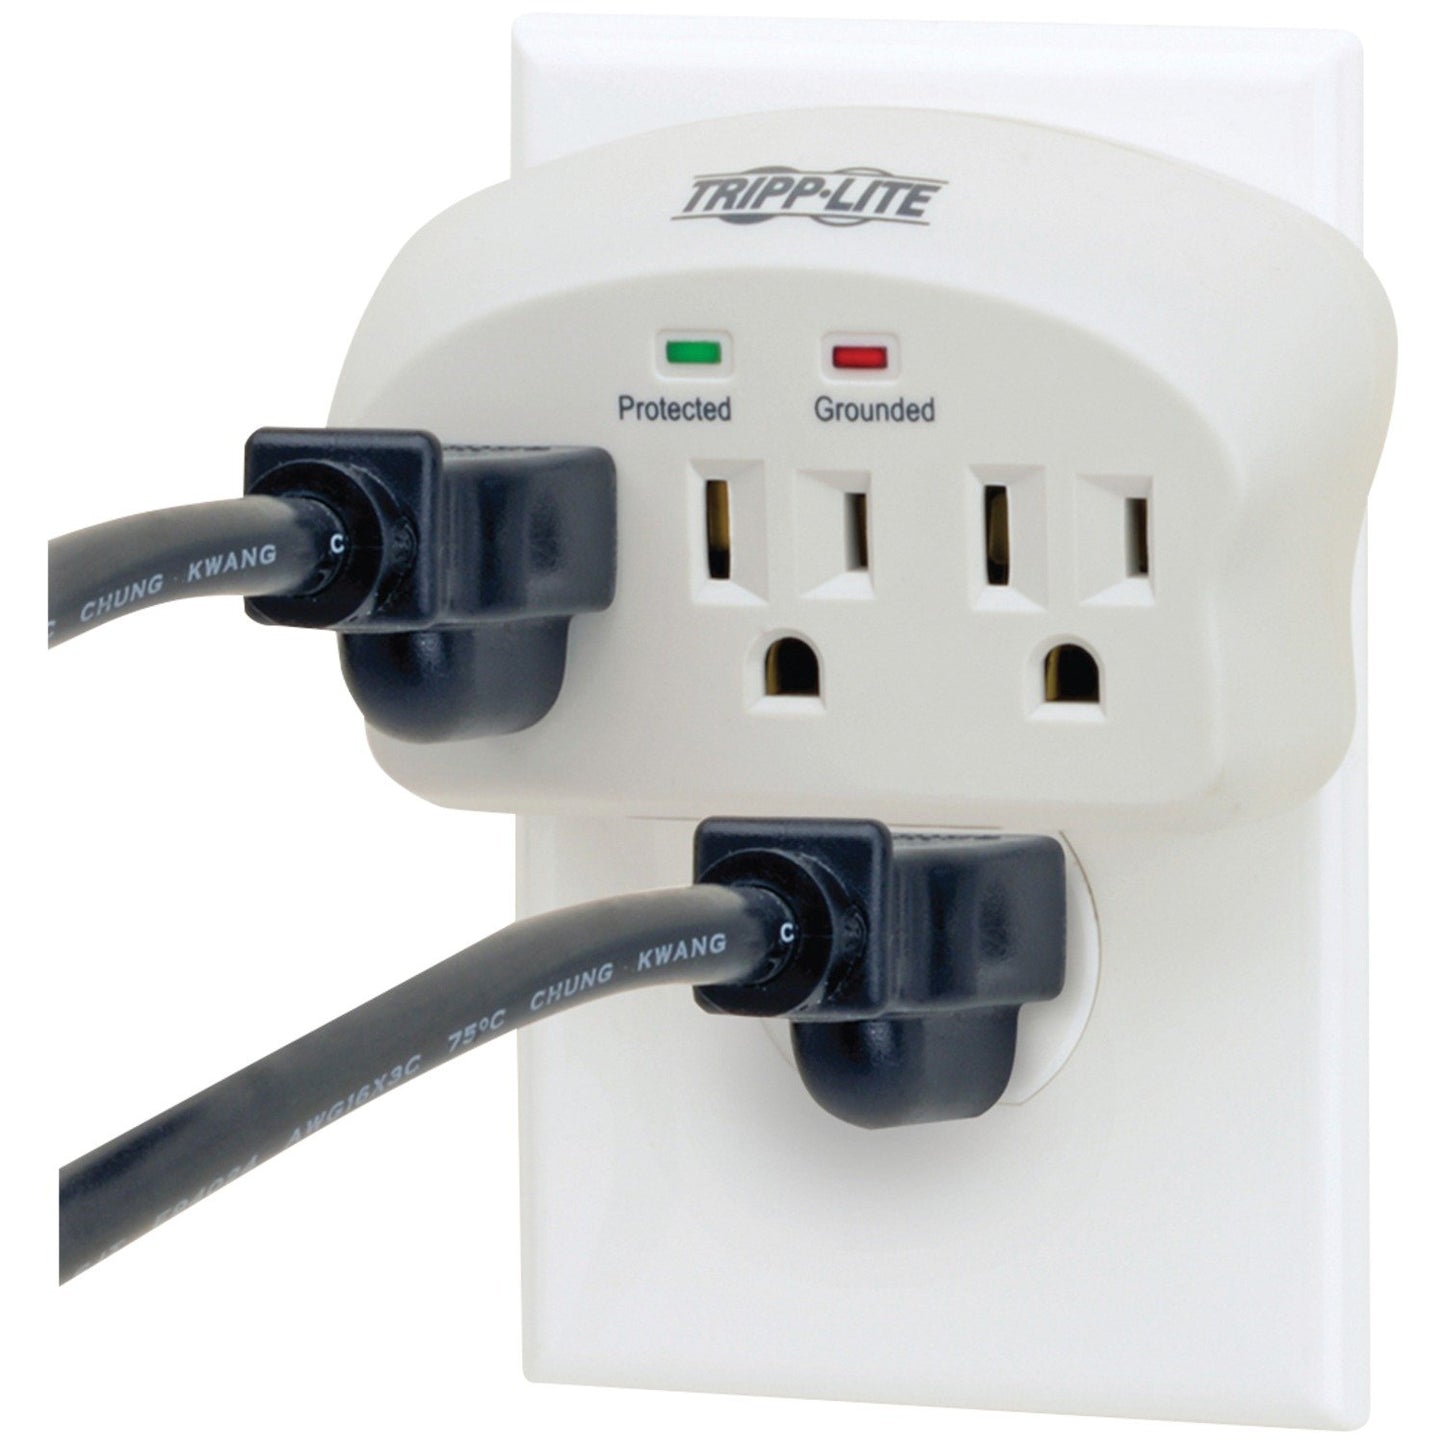 TRIPP LITE SK3-0 3 Out Direct Plug Surge Protector